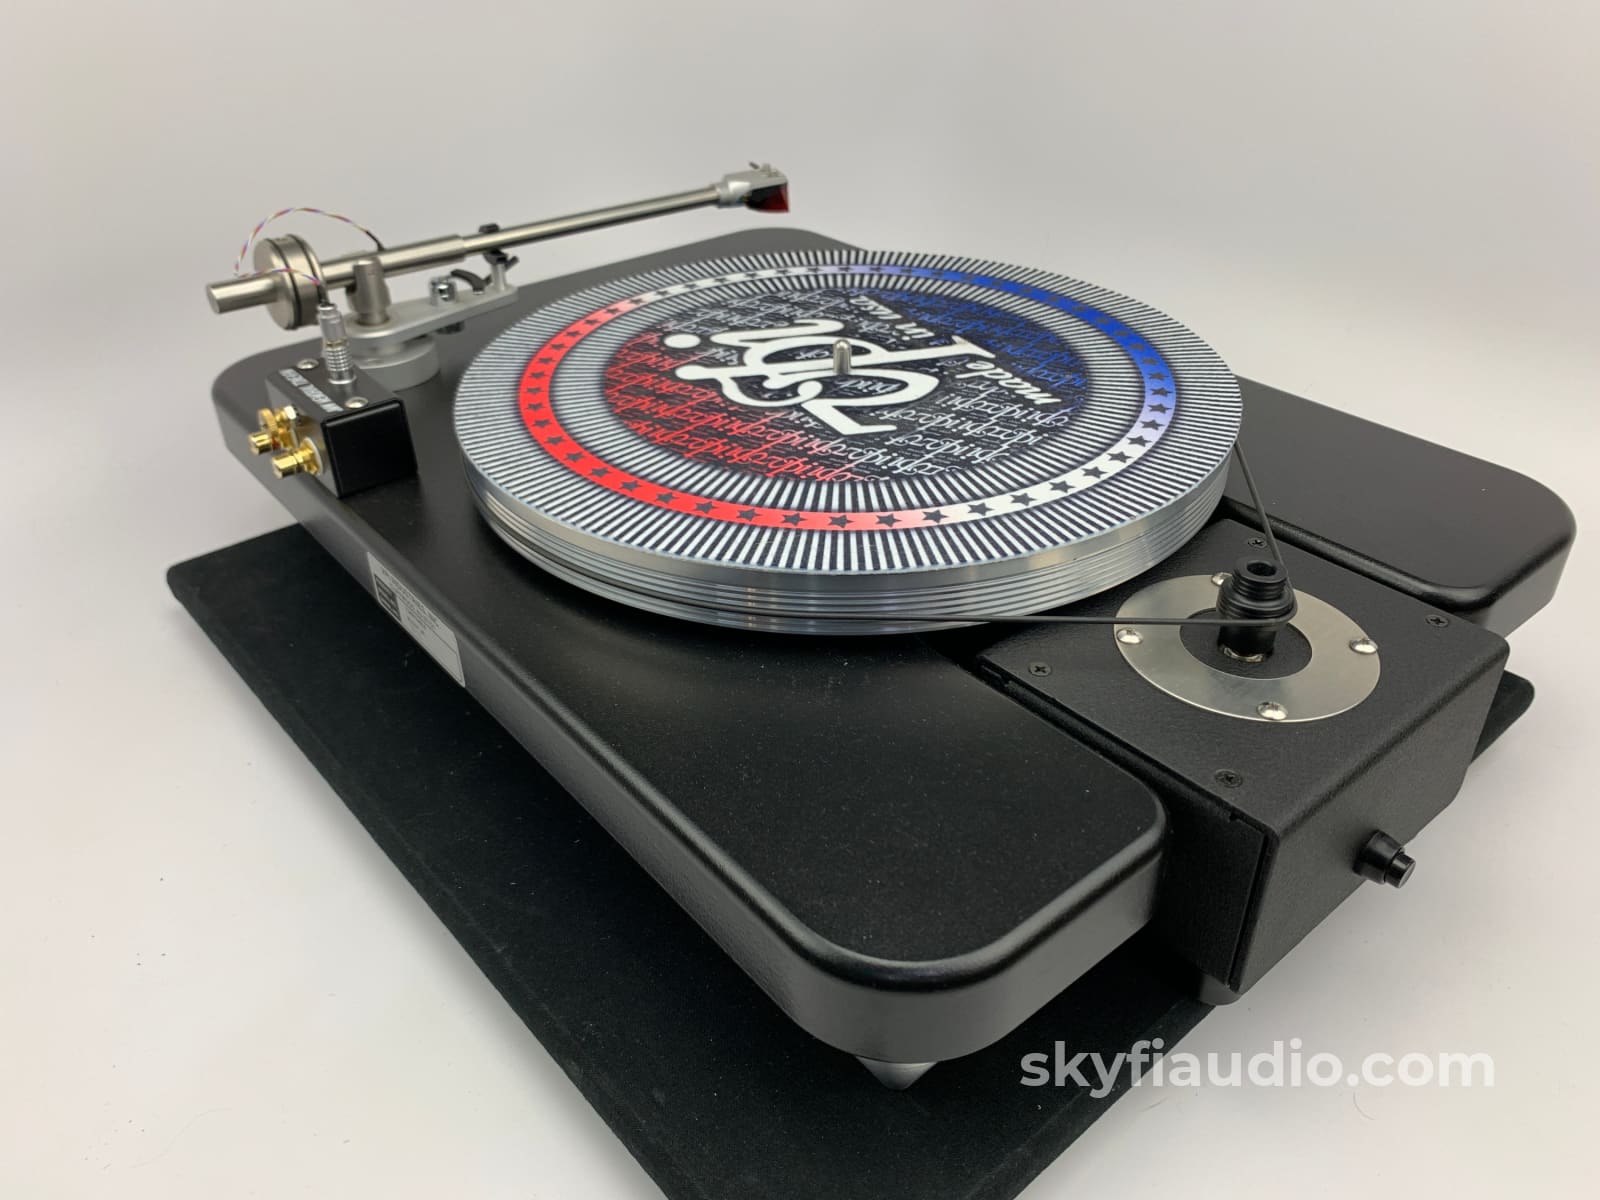 Vpi Scout Jr. Turntable With New Sumiko Cartridge